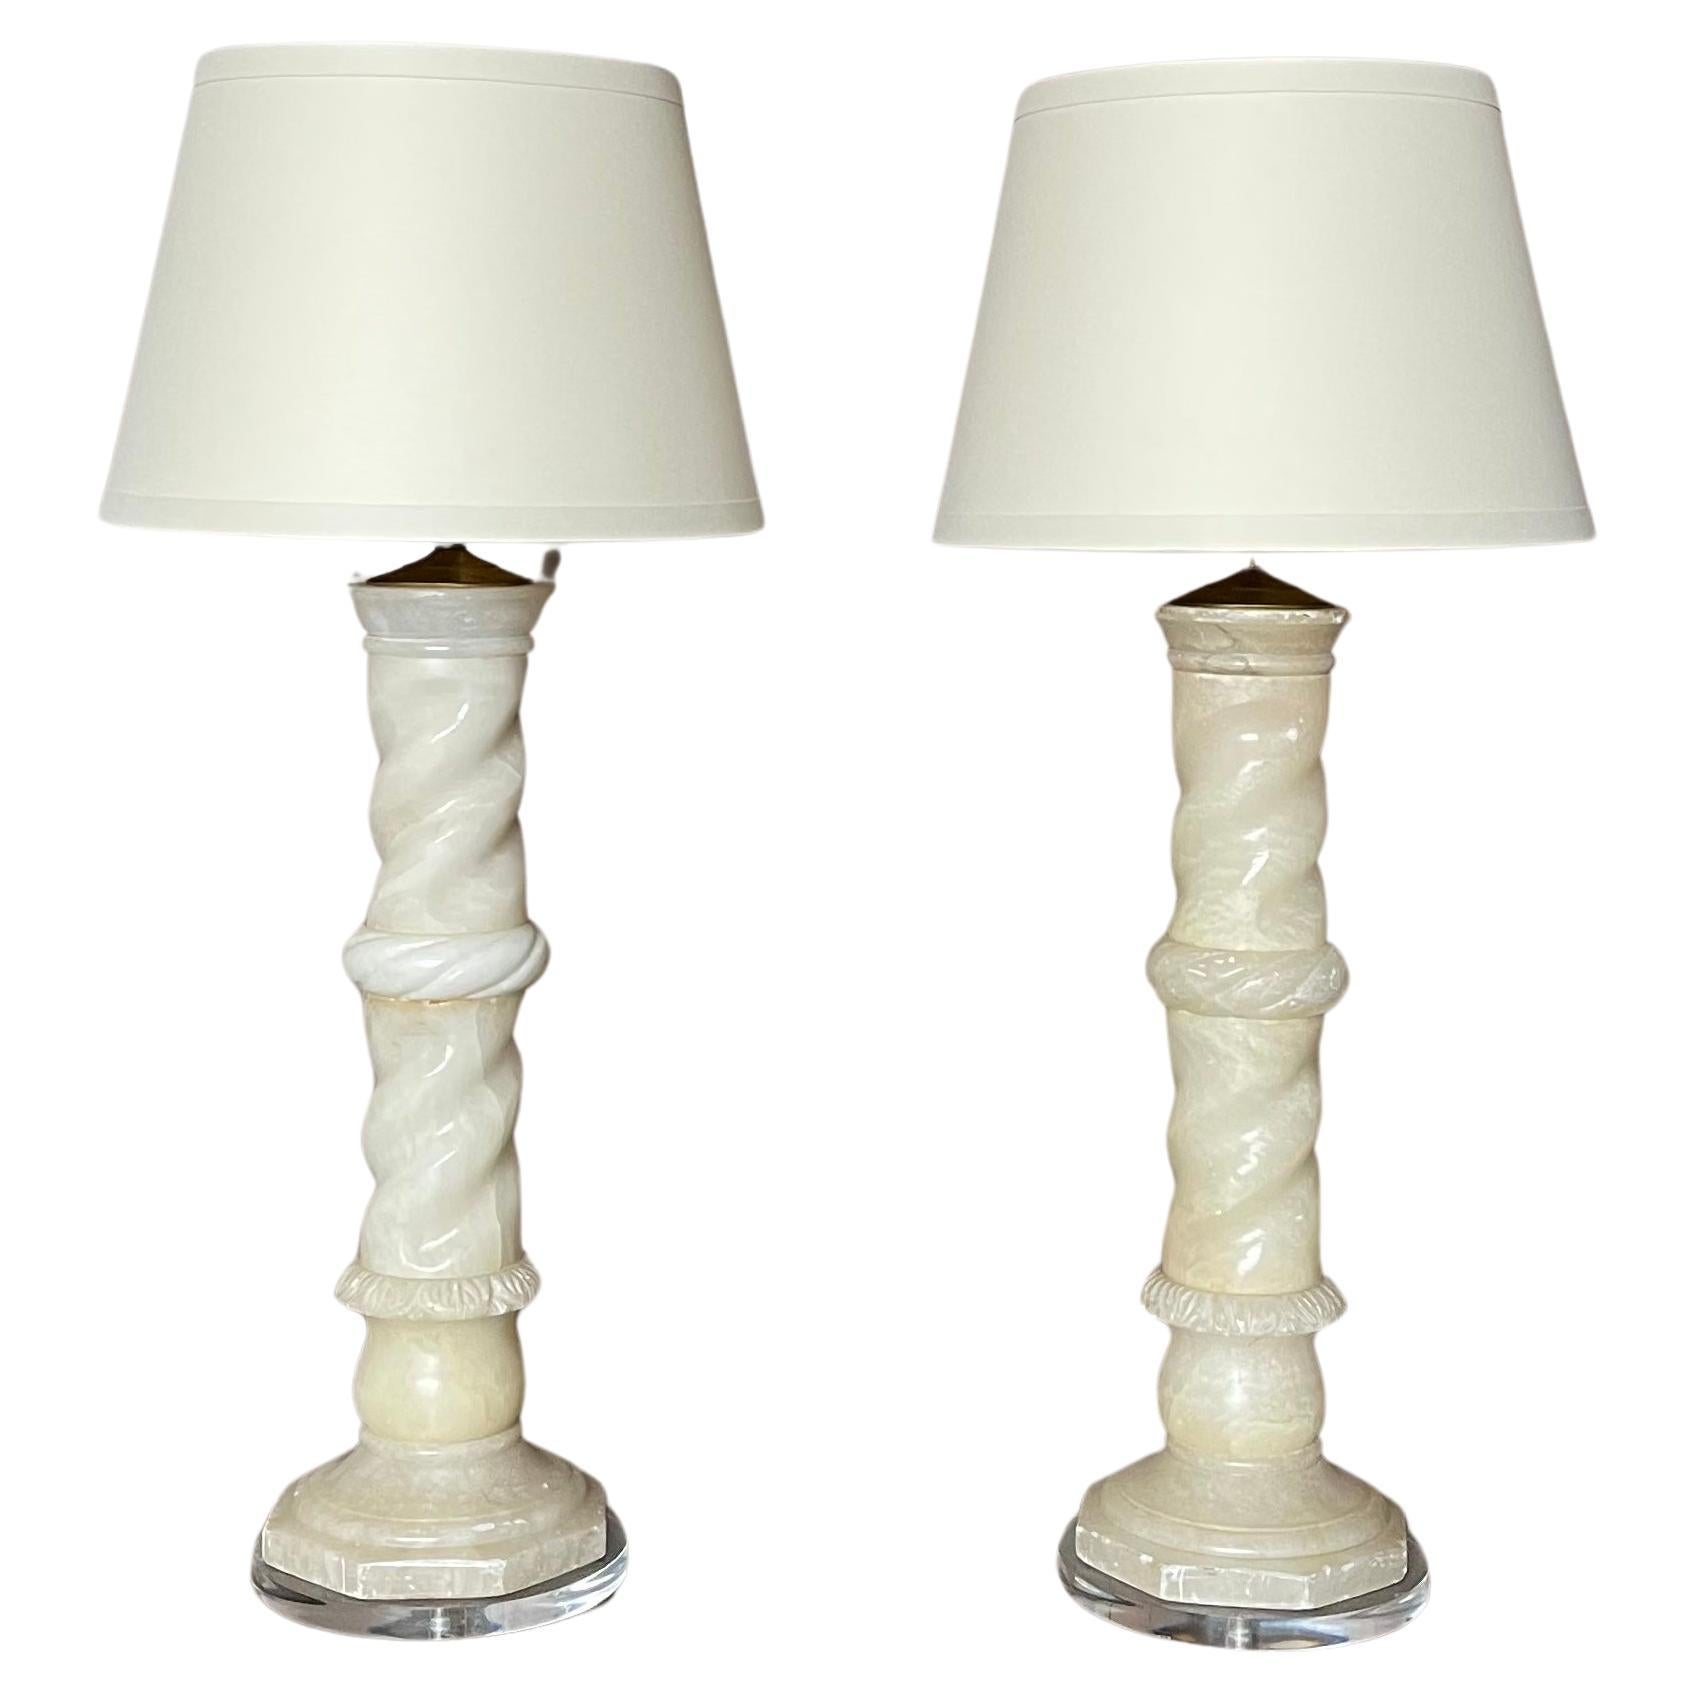 Elevate your space with this exquisite pair of Italian antique alabaster lamps, transformed into stunning pieces of functional art. Resting on sleek lucite bases, these lamps exude elegance and sophistication. Adorned with new Gold lined Tanner